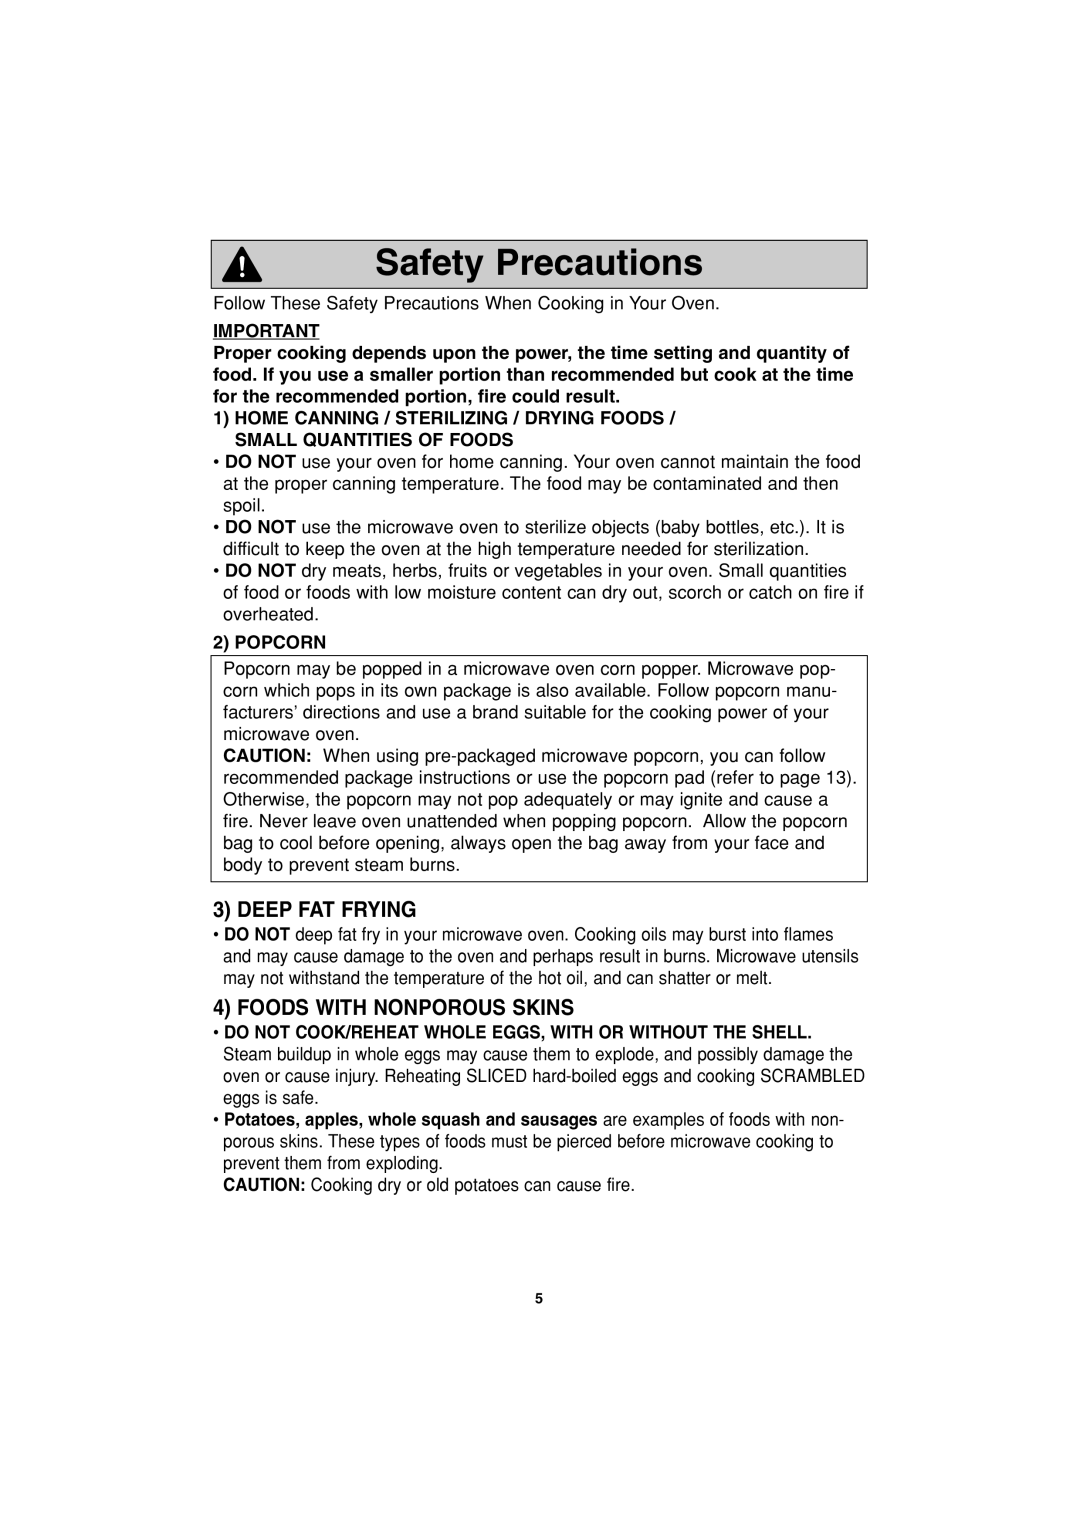 Panasonic NN-T993, NN-T793 operating instructions Safety Precautions, Deep Fat Frying, Foods With Nonporous Skins 